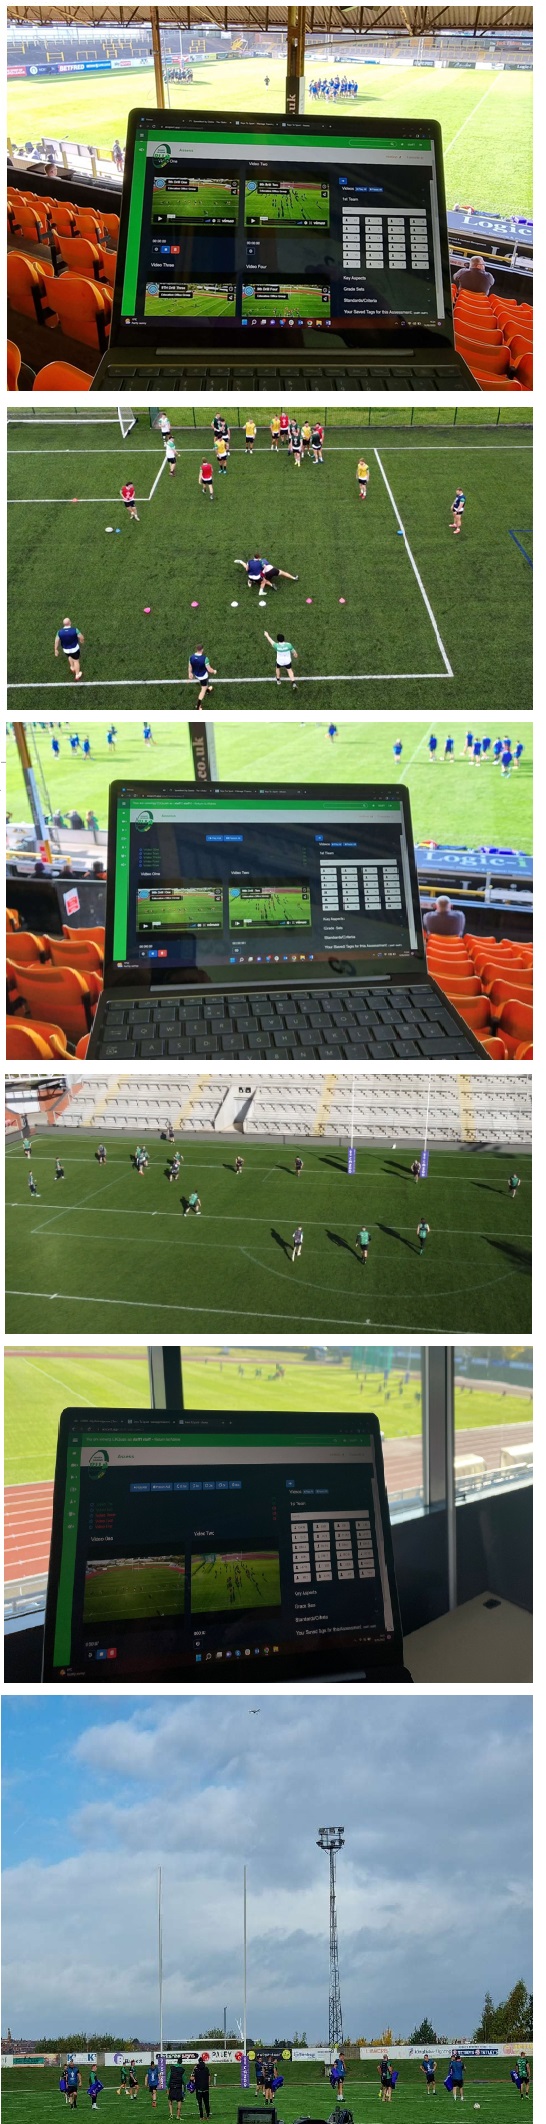 A training, coaching, and session platform for coaches to educate, develop and evaluate players